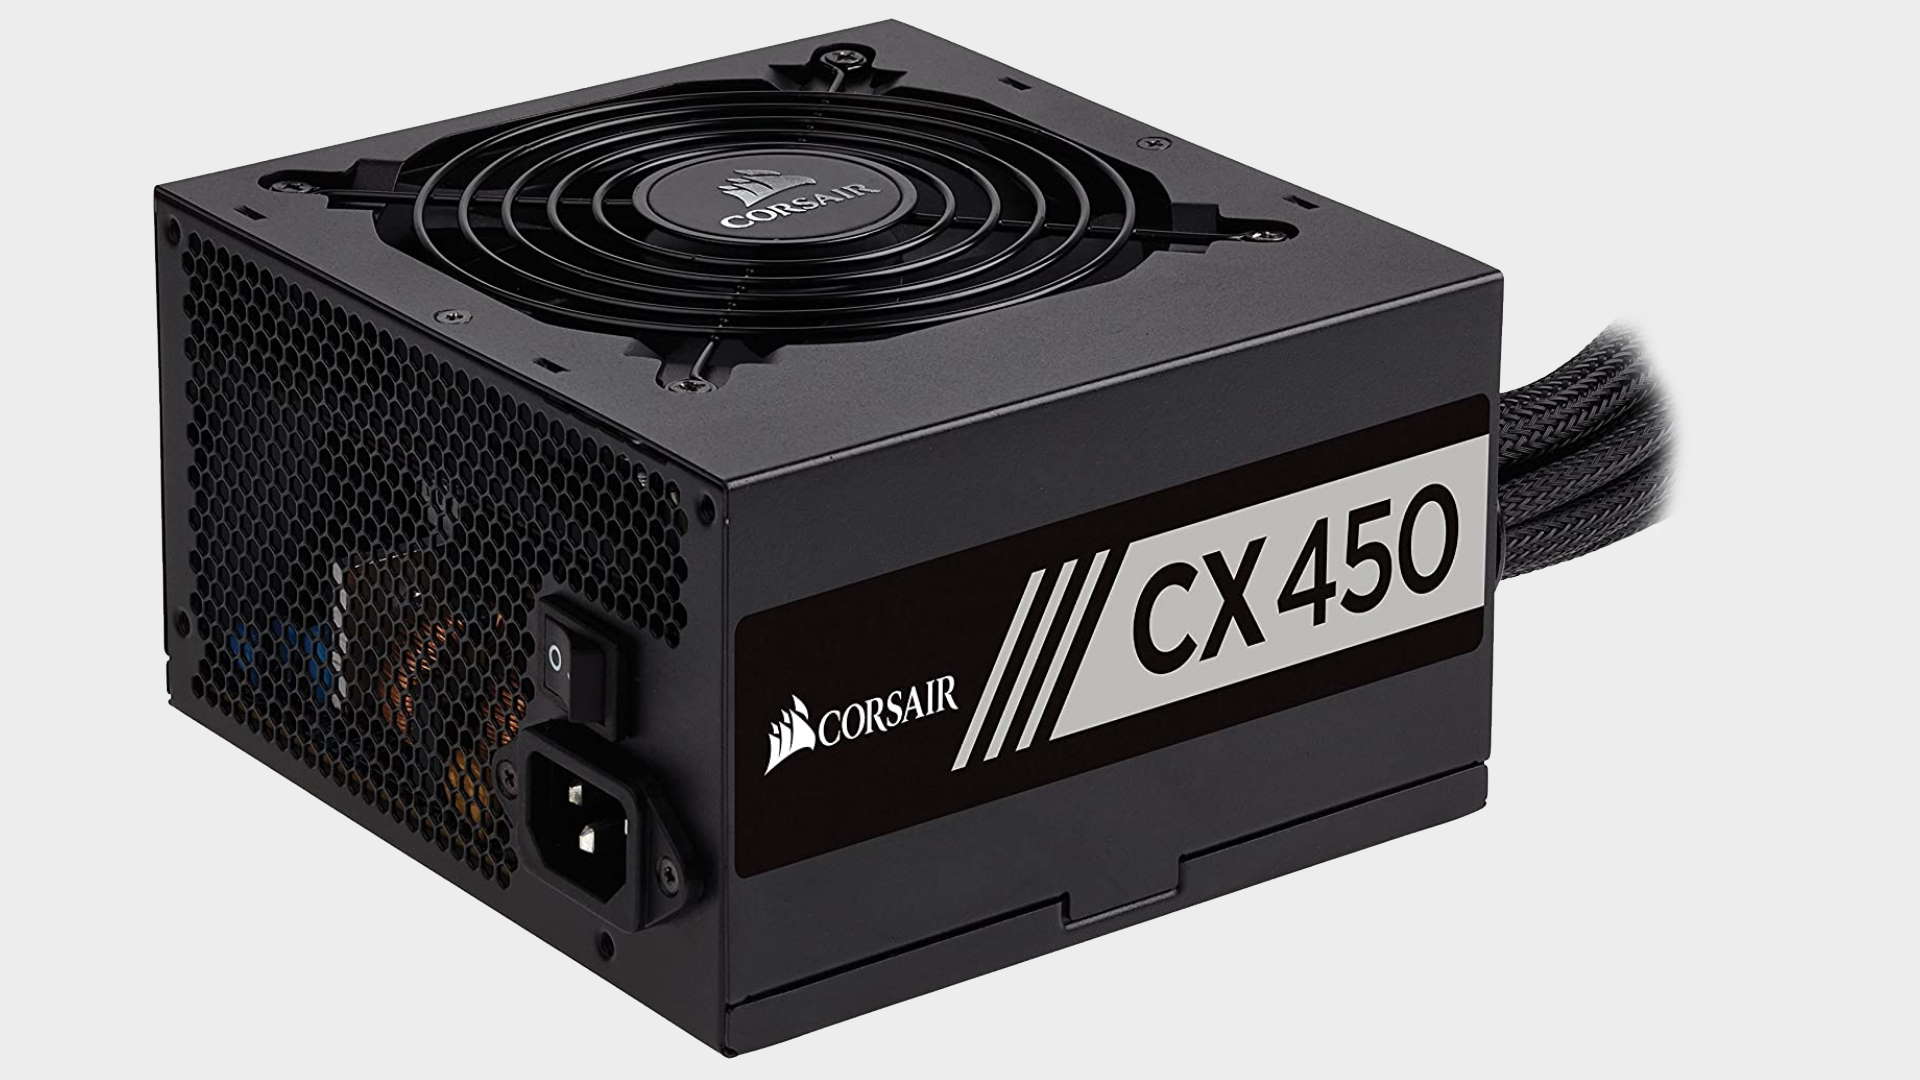 Corsair CX450 power supply on a grey background